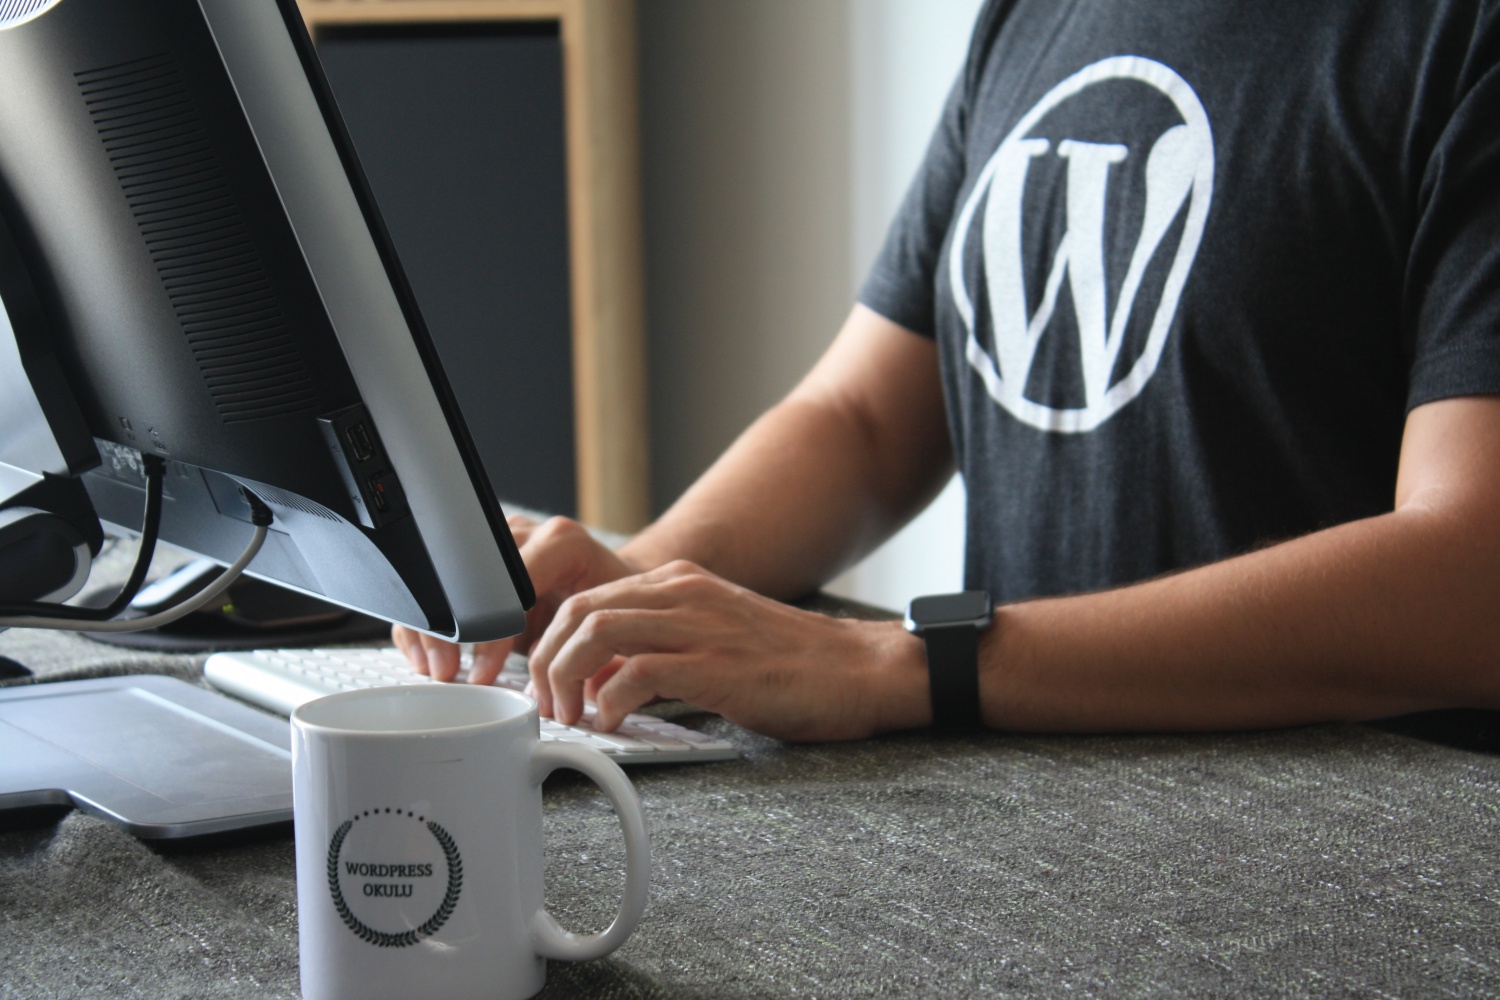 WordPress 'WooCommerce Payments' Plugin Critical Vulnerability Spotted: Here's What You Need to Know